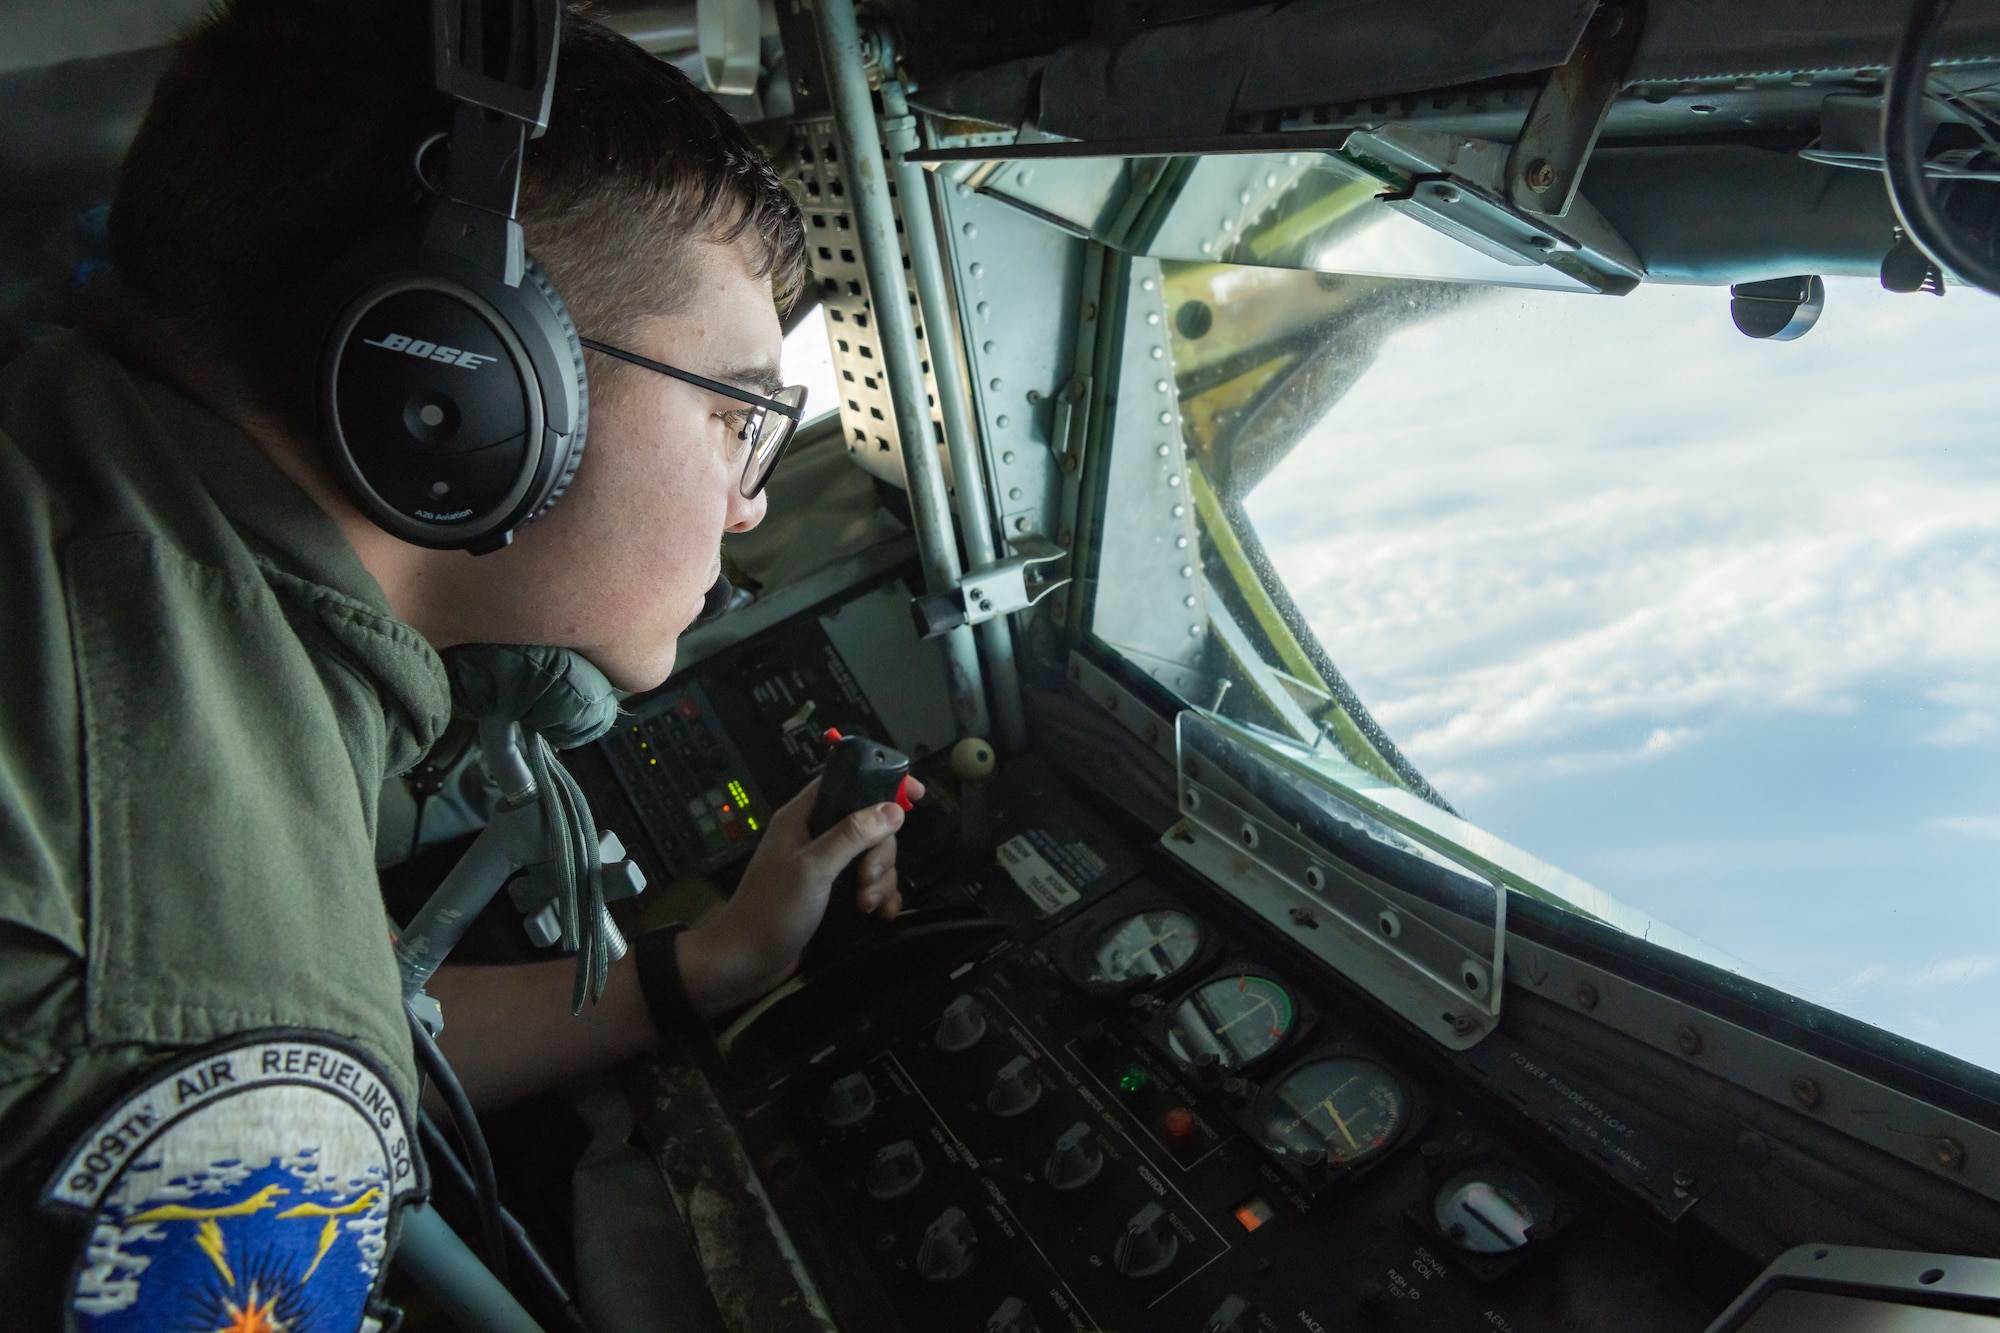 U.S. Air Force Airman 1st Class Dillon Neal, boom operator assigned to the 909th Air Refueling Squadron, prepares to refuel a B-1B Lancer from the 28th Bomb Wing, Ellsworth Air Force Base, S.D., during a 32-hour round-trip sortie to conduct operations over the Pacific as part of a joint U.S. Indo-Pacific Command and U.S. Strategic Command (USSTRATCOM) Bomber Task Force (BTF) mission April 30, 2020. The 909th ARS enables the execution of tactical, conventional, and peacetime operations in the Indo-Asia Pacific region. (U.S. Air Force photo by Senior Airman Cynthia Belío)